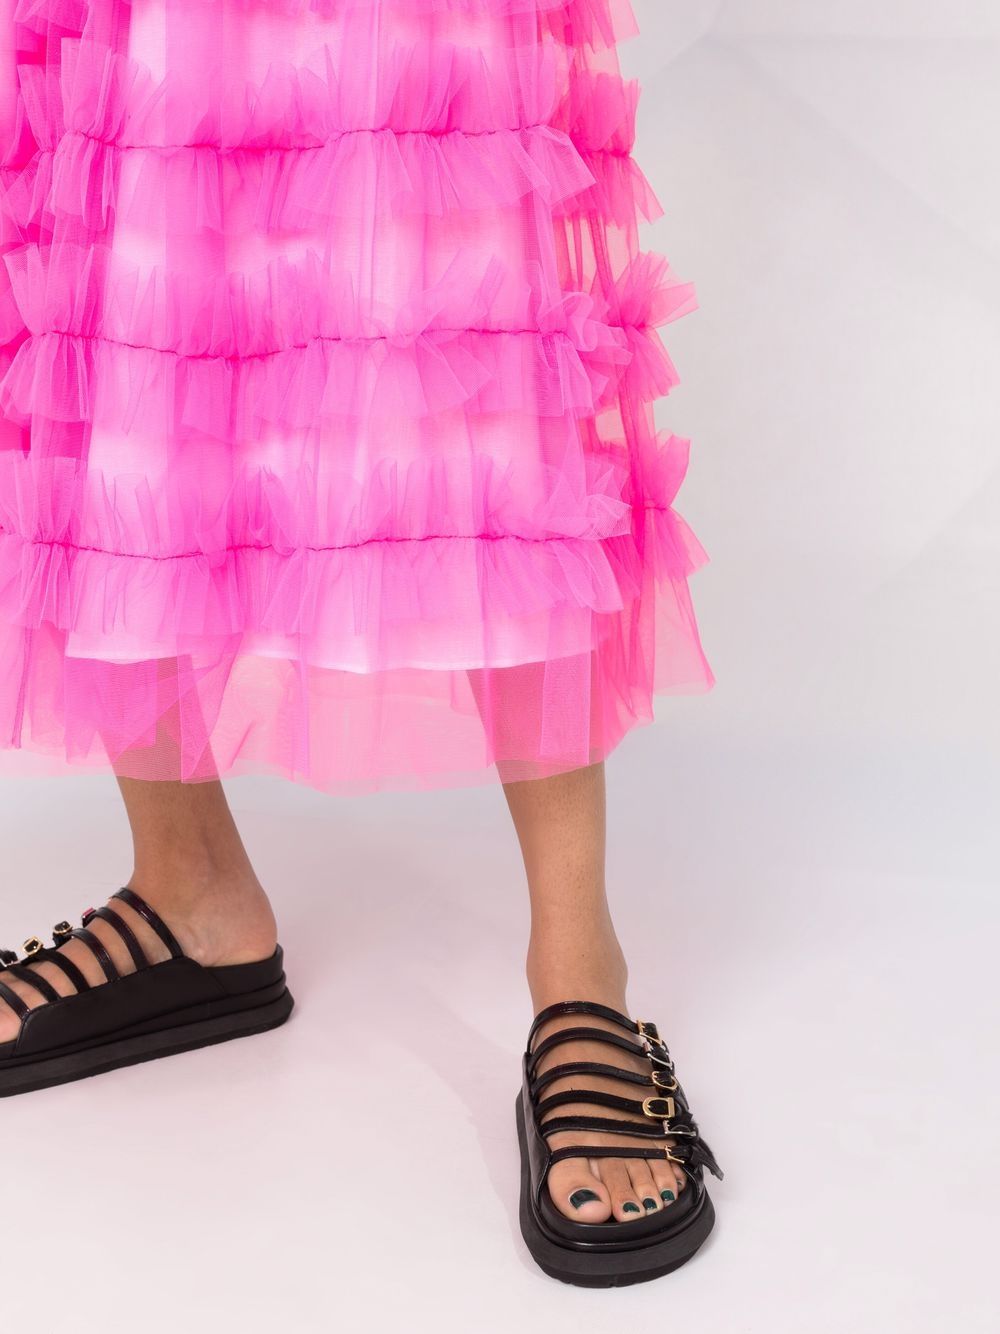 Shop P.A.R.O.S.H. ruffled tulle skirt with Express Delivery - FARFETCH